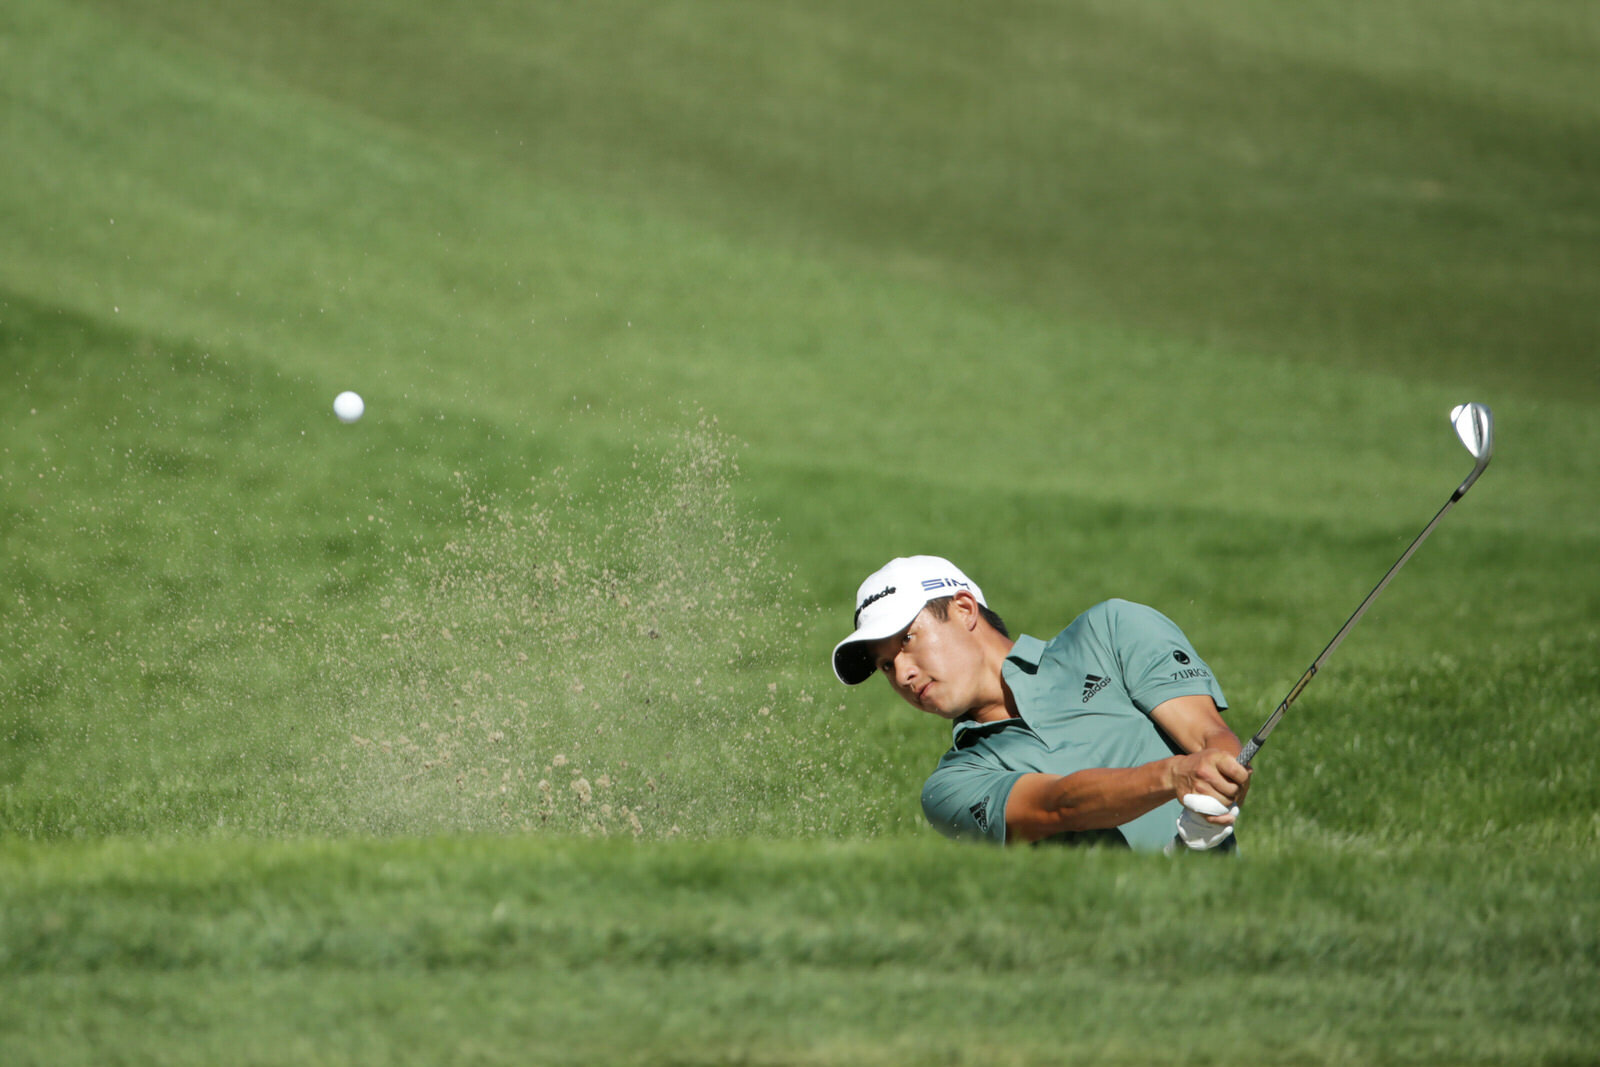  LAS VEGAS, NEVADA - OCTOBER 16: Collin Morikawa of the United States plays a shot from a bunker on the 16th hole during the second round of the CJ Cup @ Shadow Creek  on October 16, 2020 in Las Vegas, Nevada. (Photo by Jeff Gross/Getty Images) 